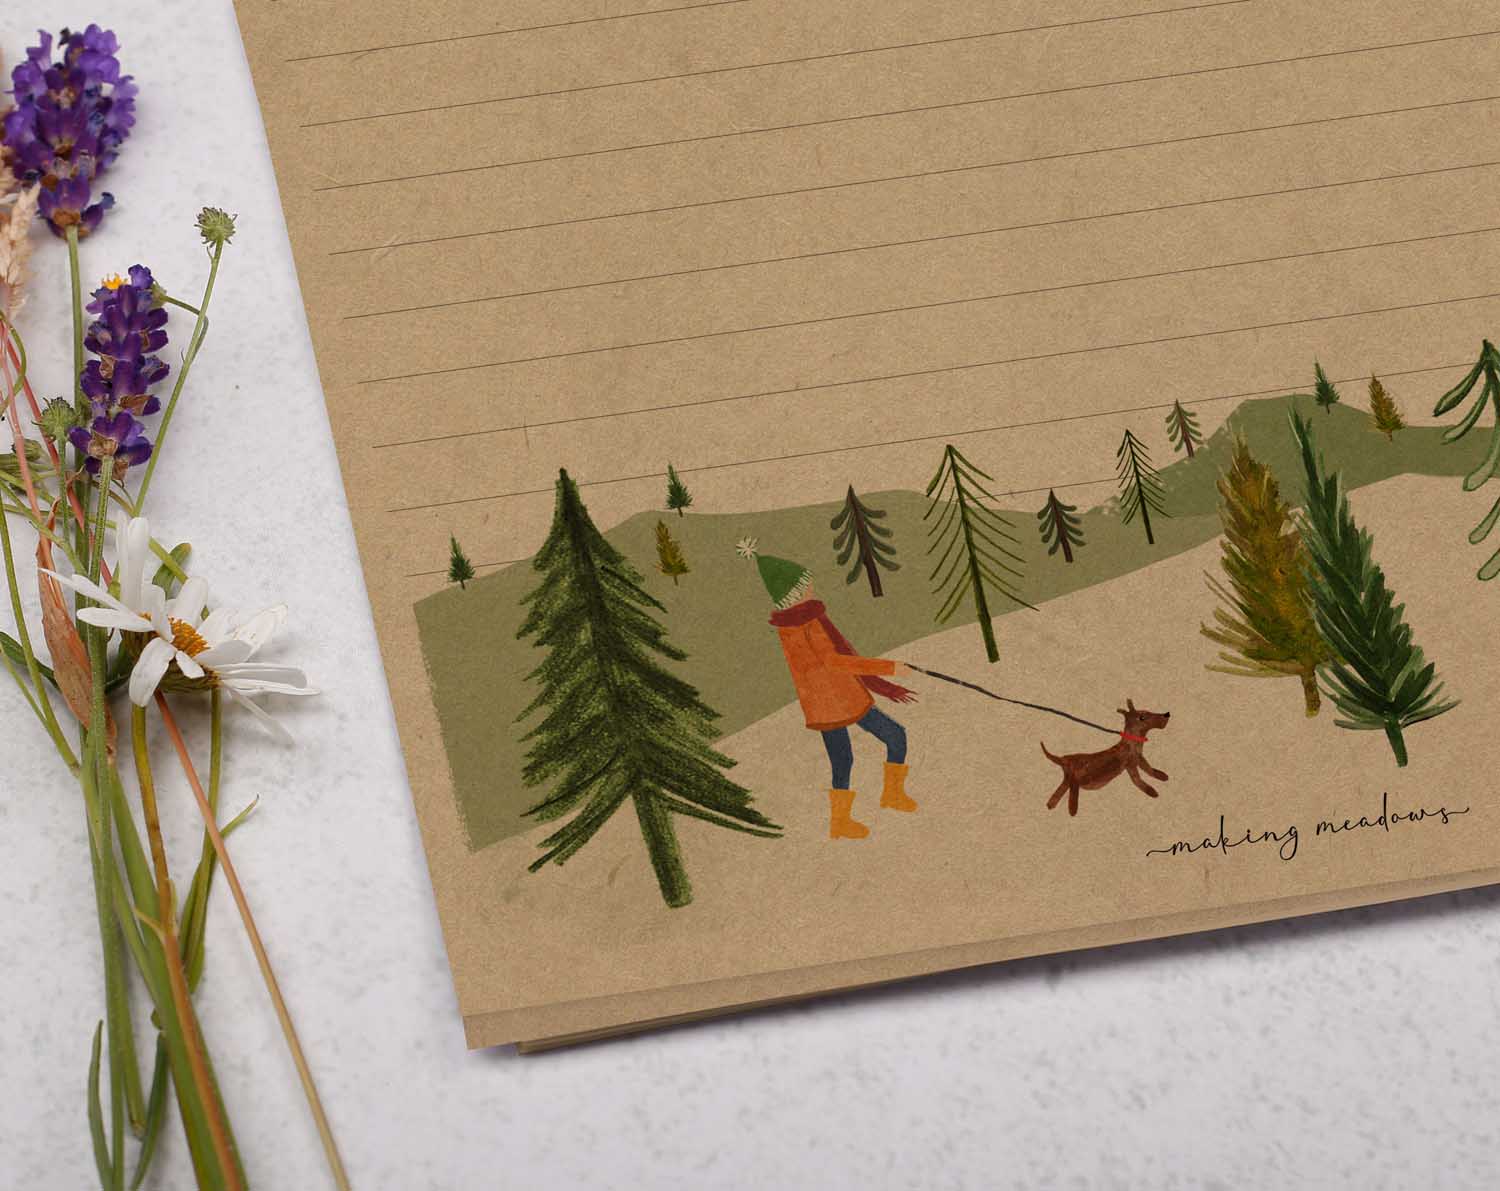 A4 kraft writing paper with dog walker